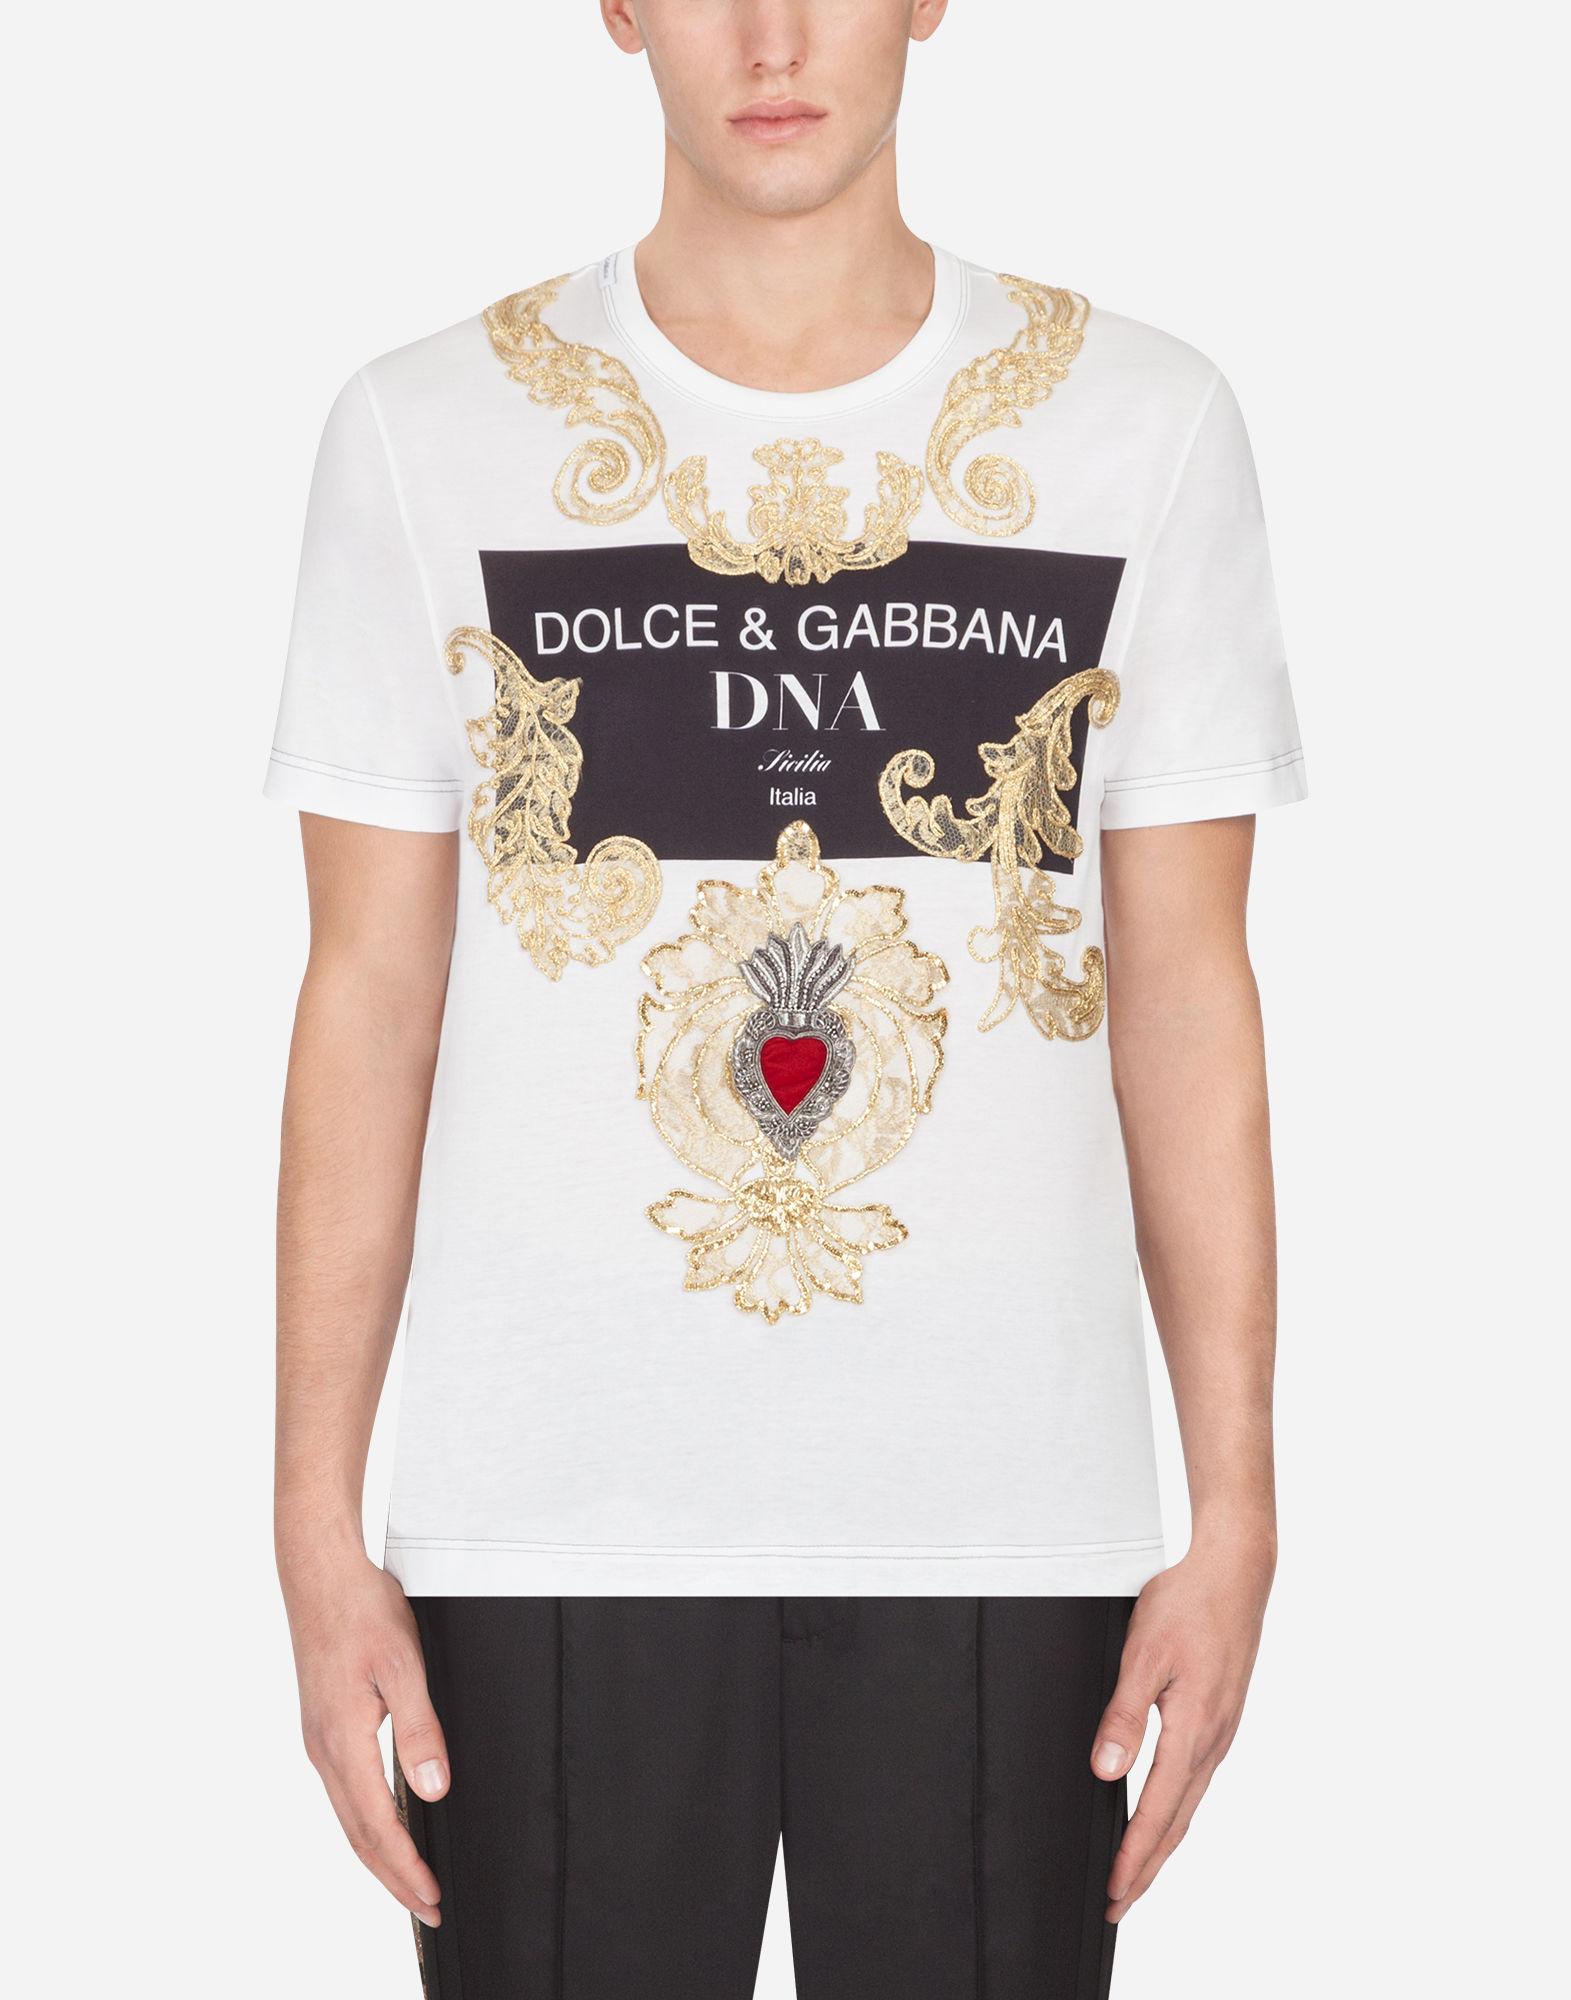 Dolce & Gabbana Baroque Embroidered T-shirt in White for Men - Lyst